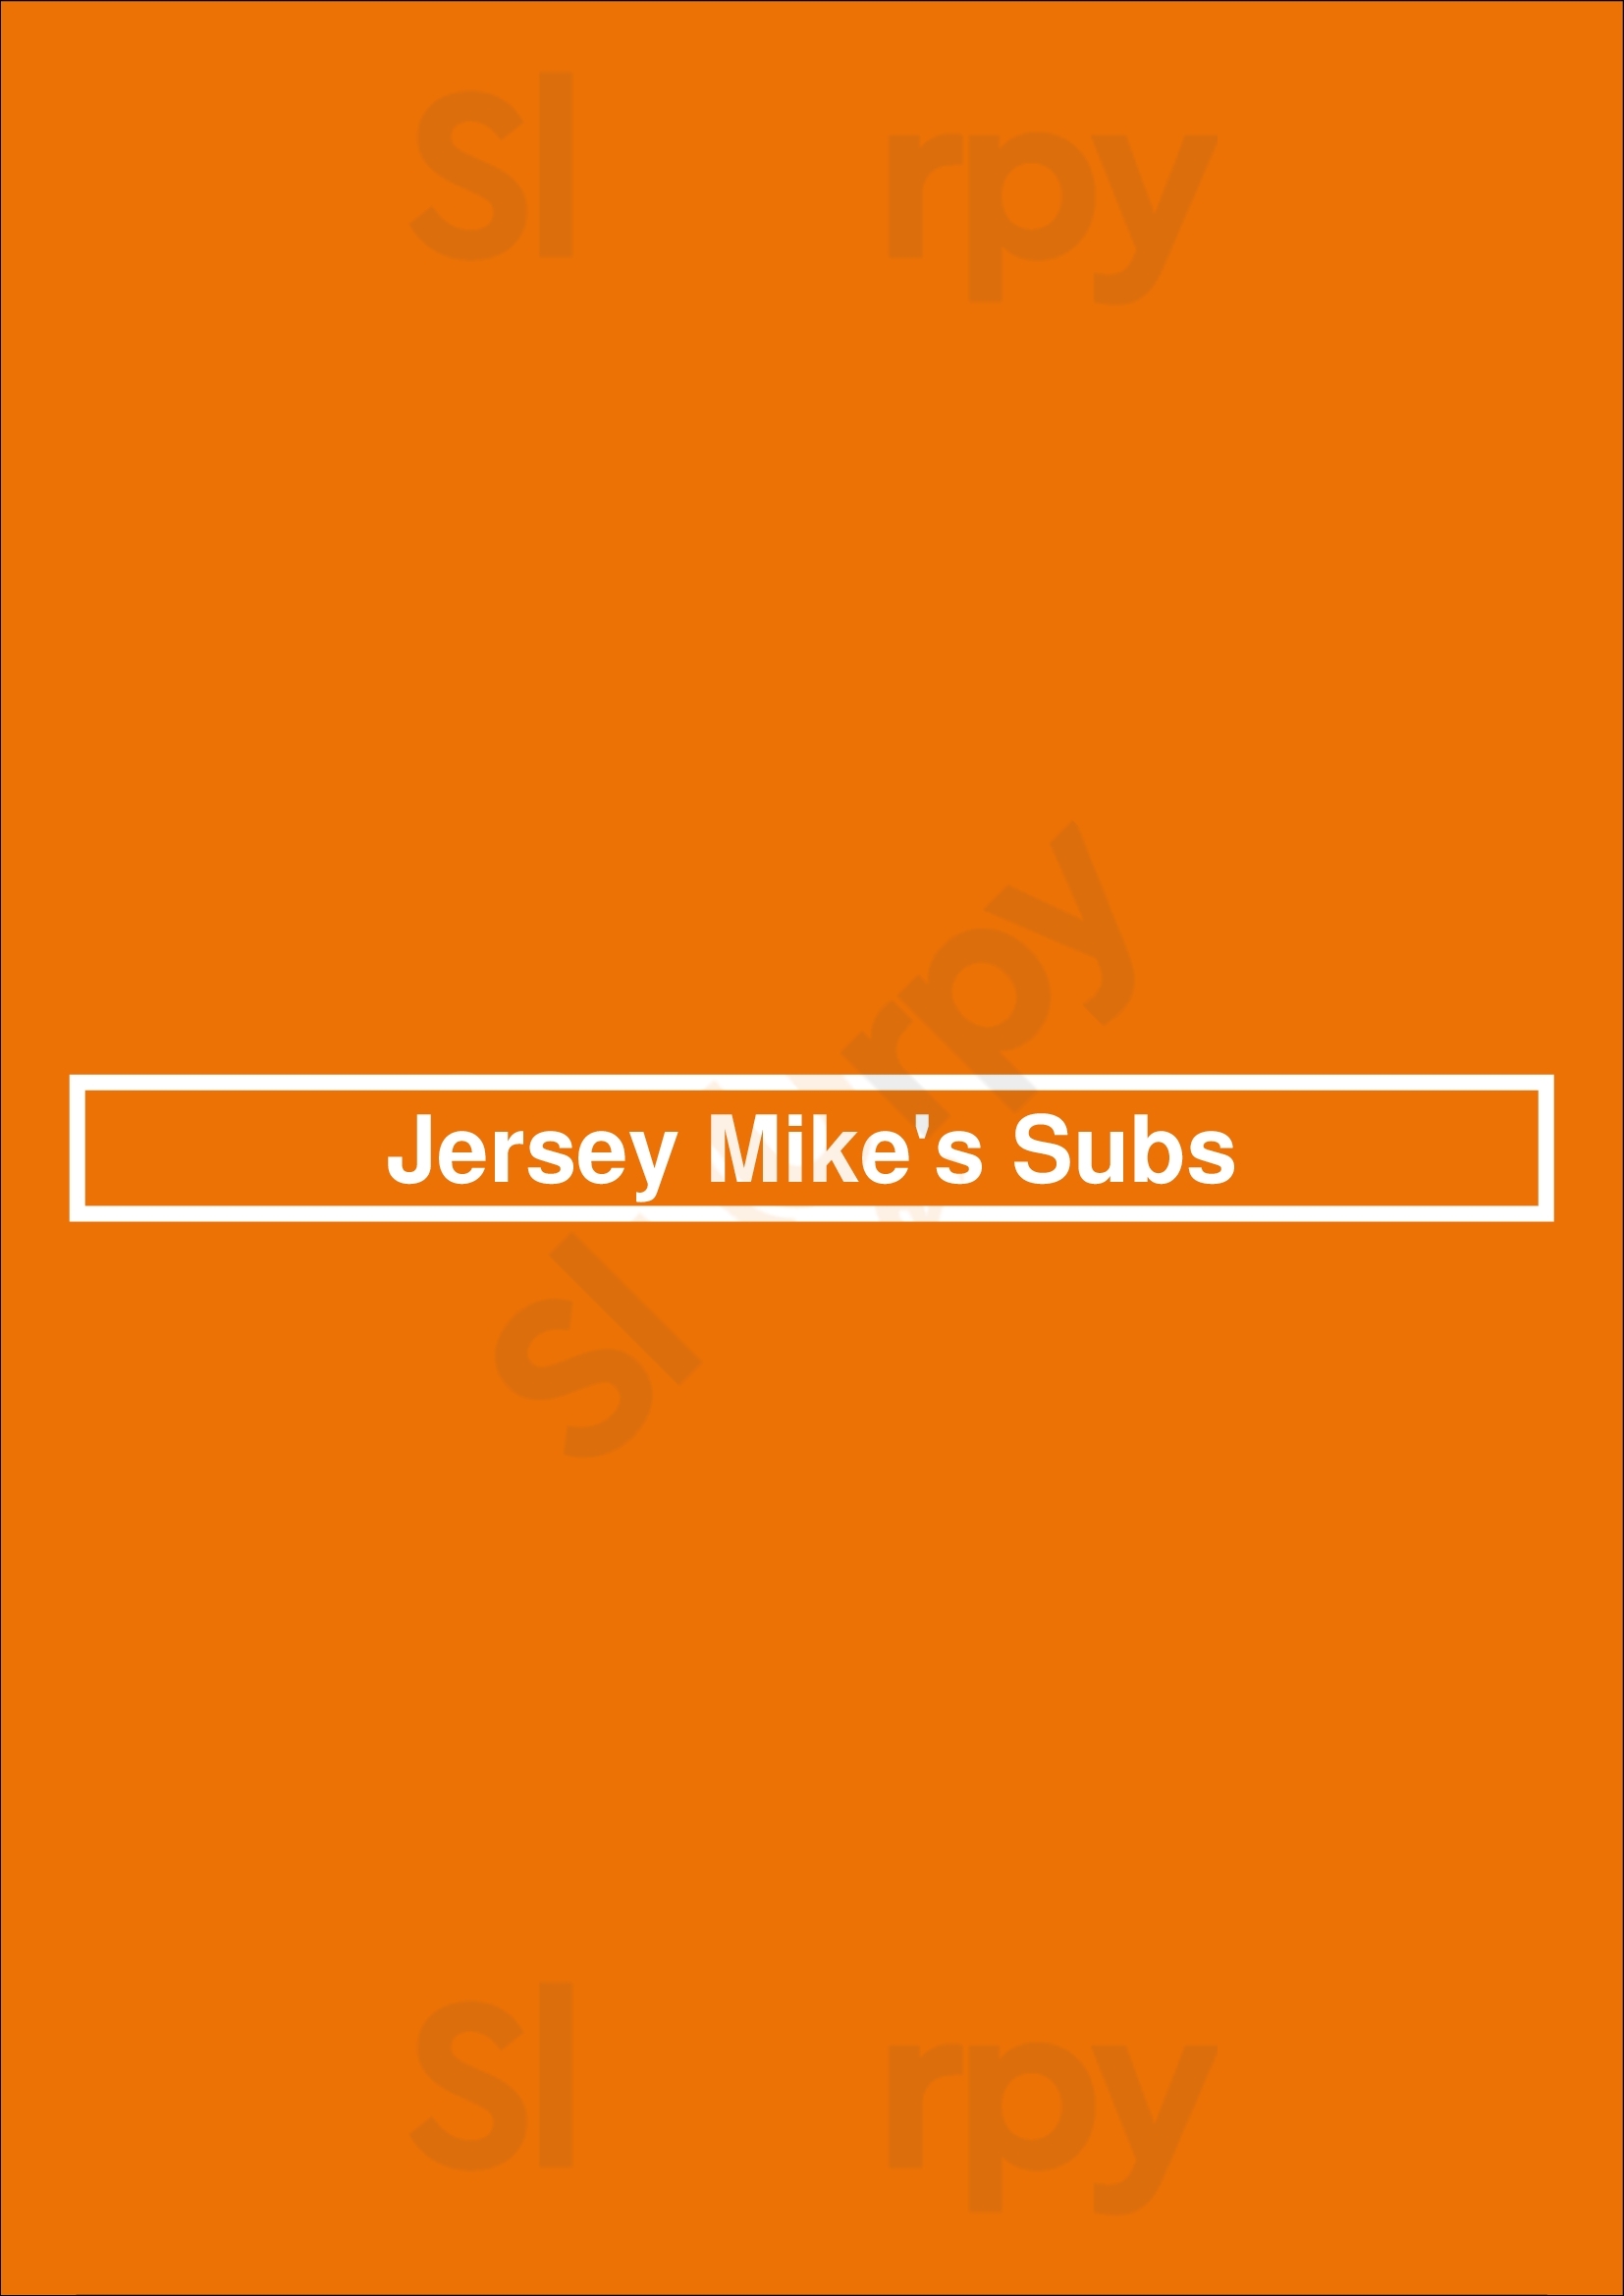 Jersey Mike's Subs Sparks Menu - 1